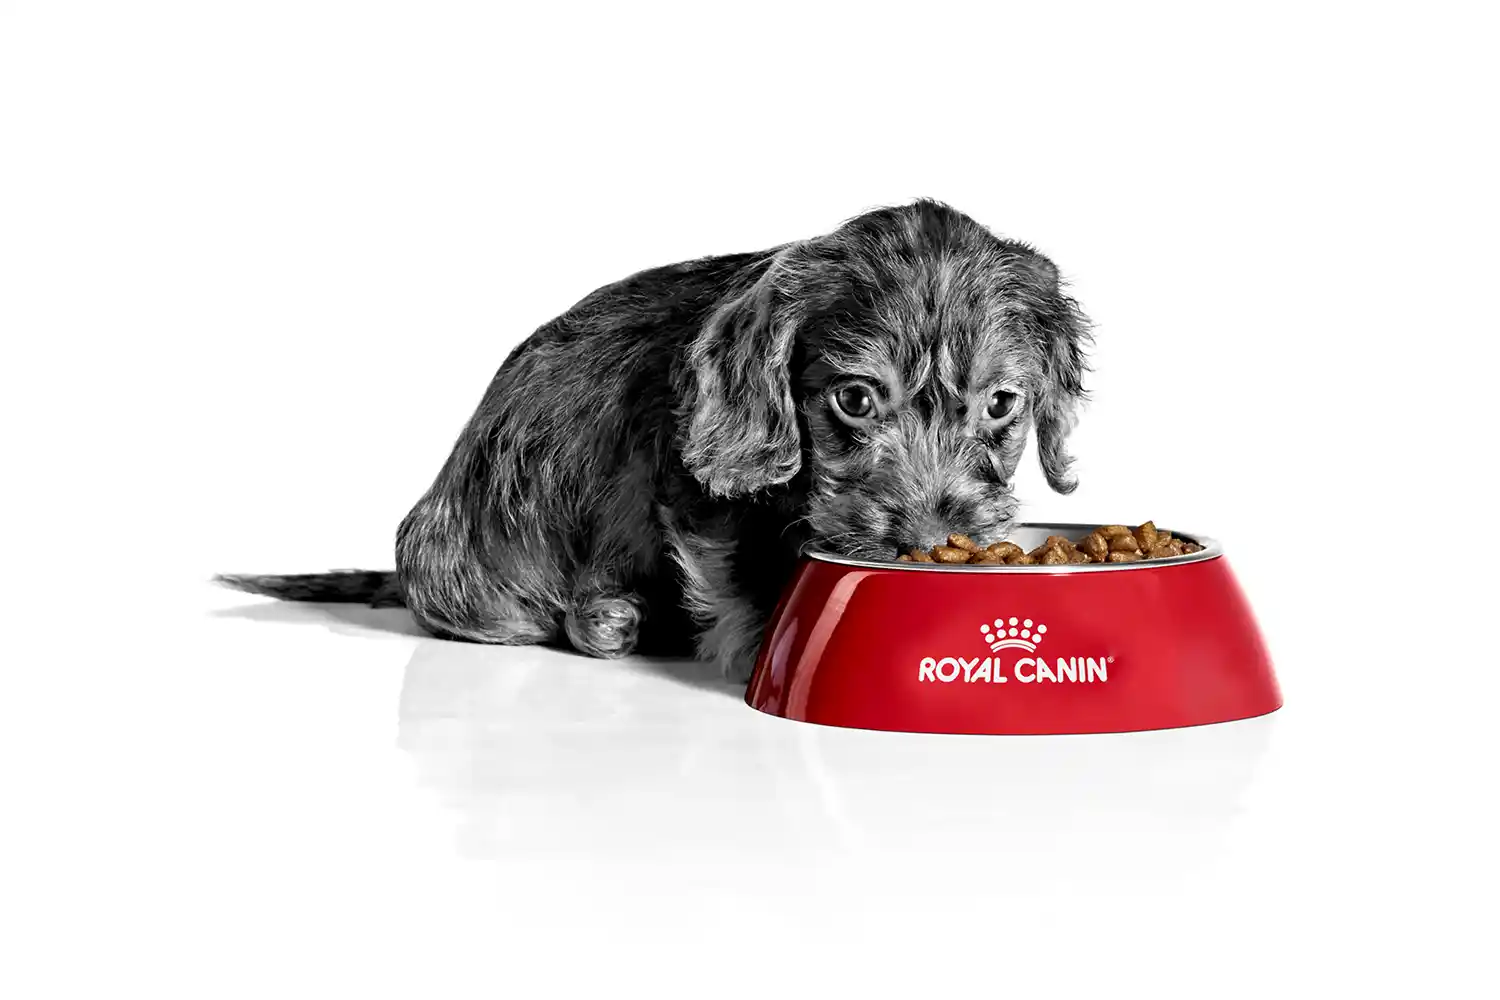 A cute puppy eating from a red Royal Canin bowl